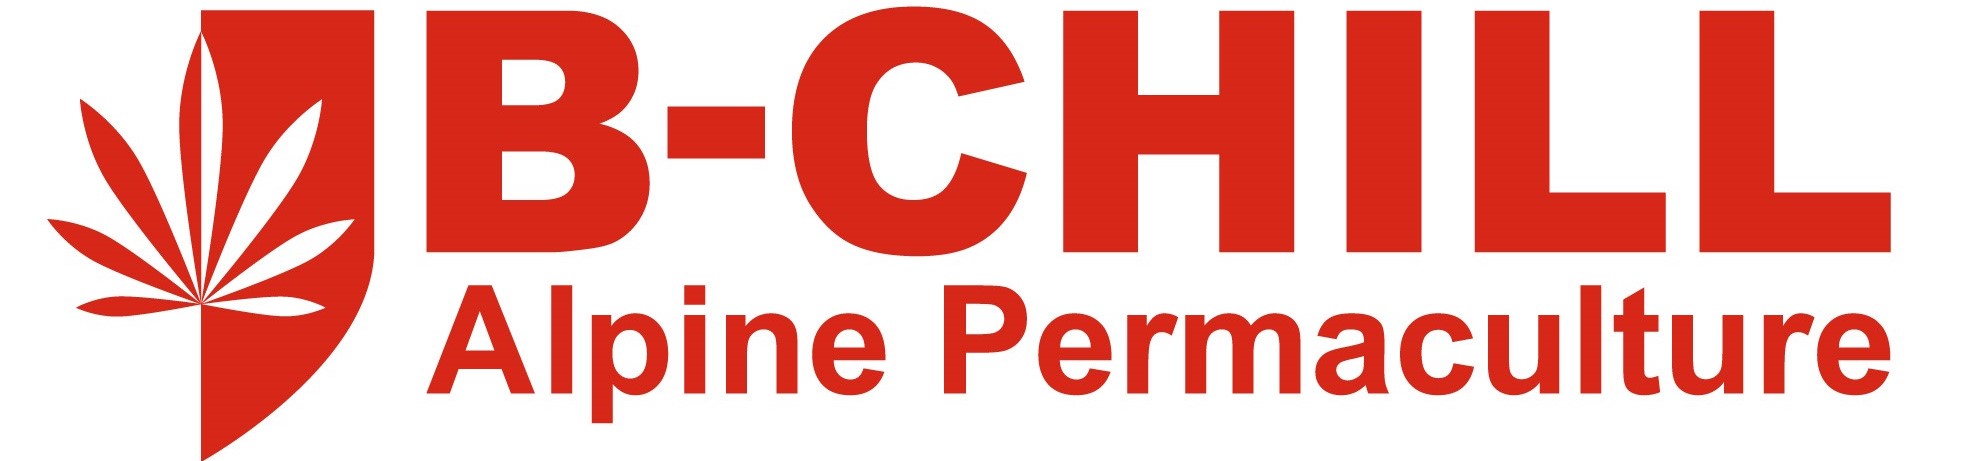 B-Chill logo Alpine Permaculture